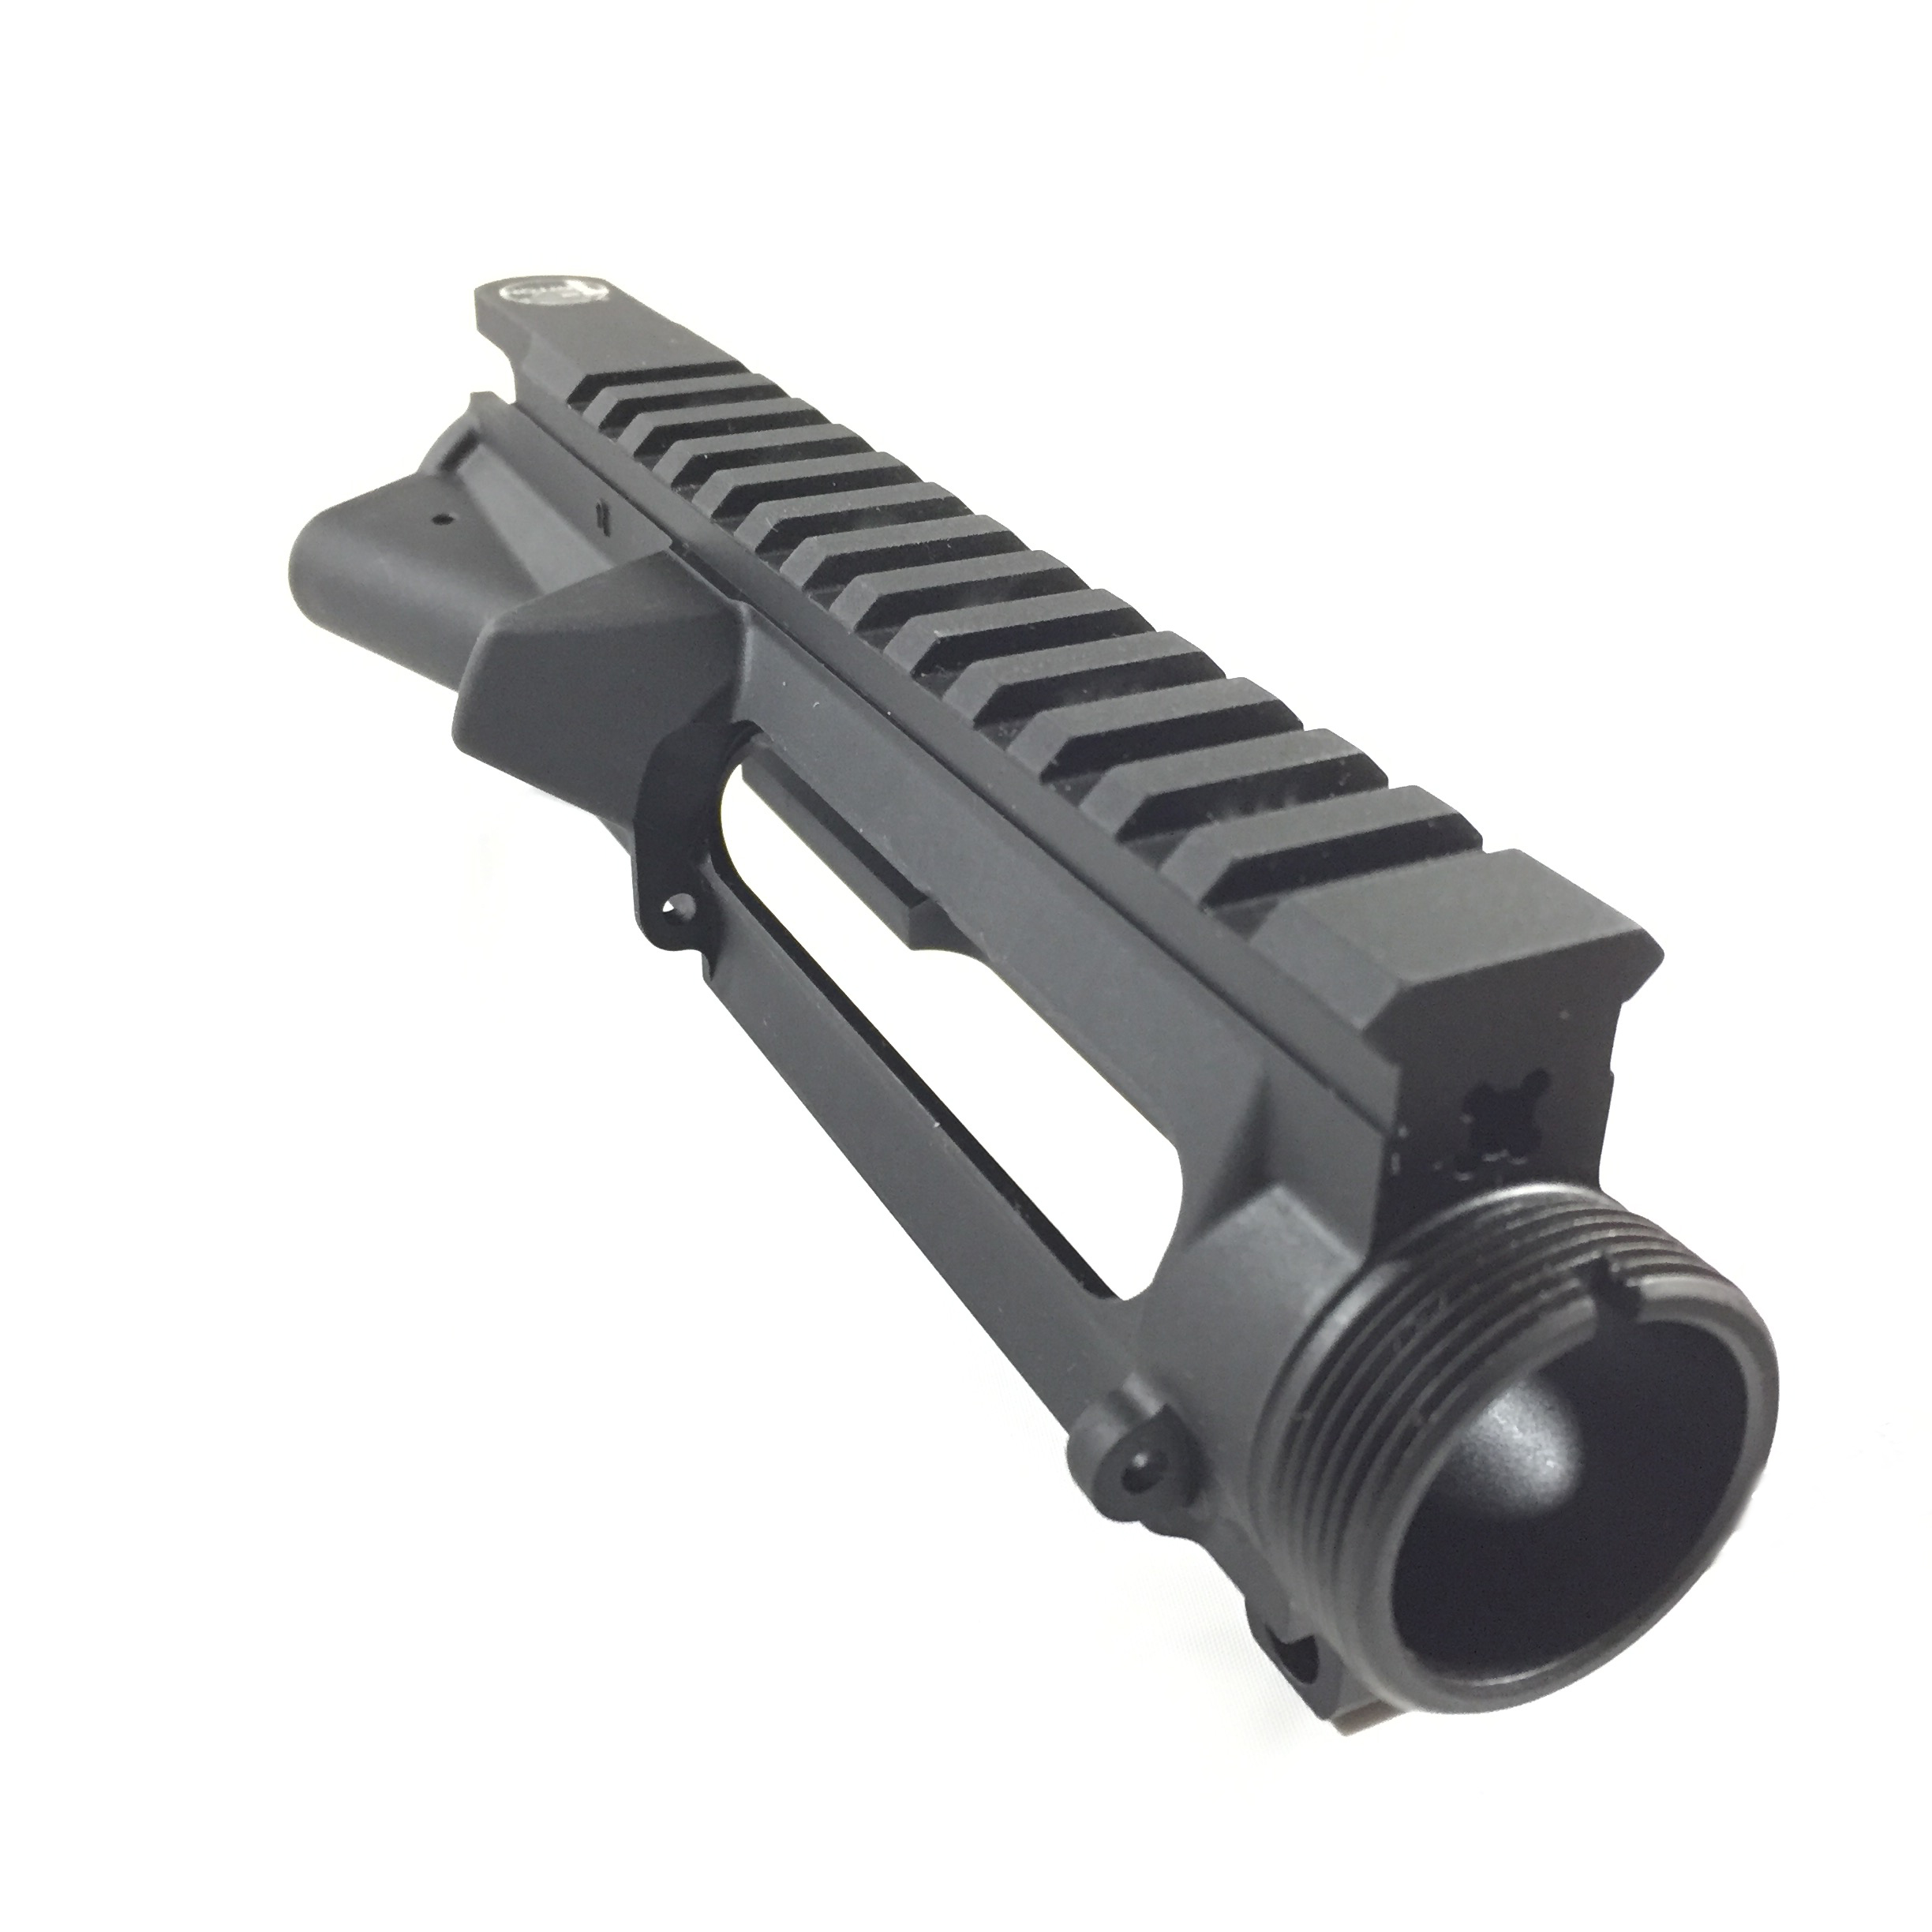 Triton Forged Upper Receiver